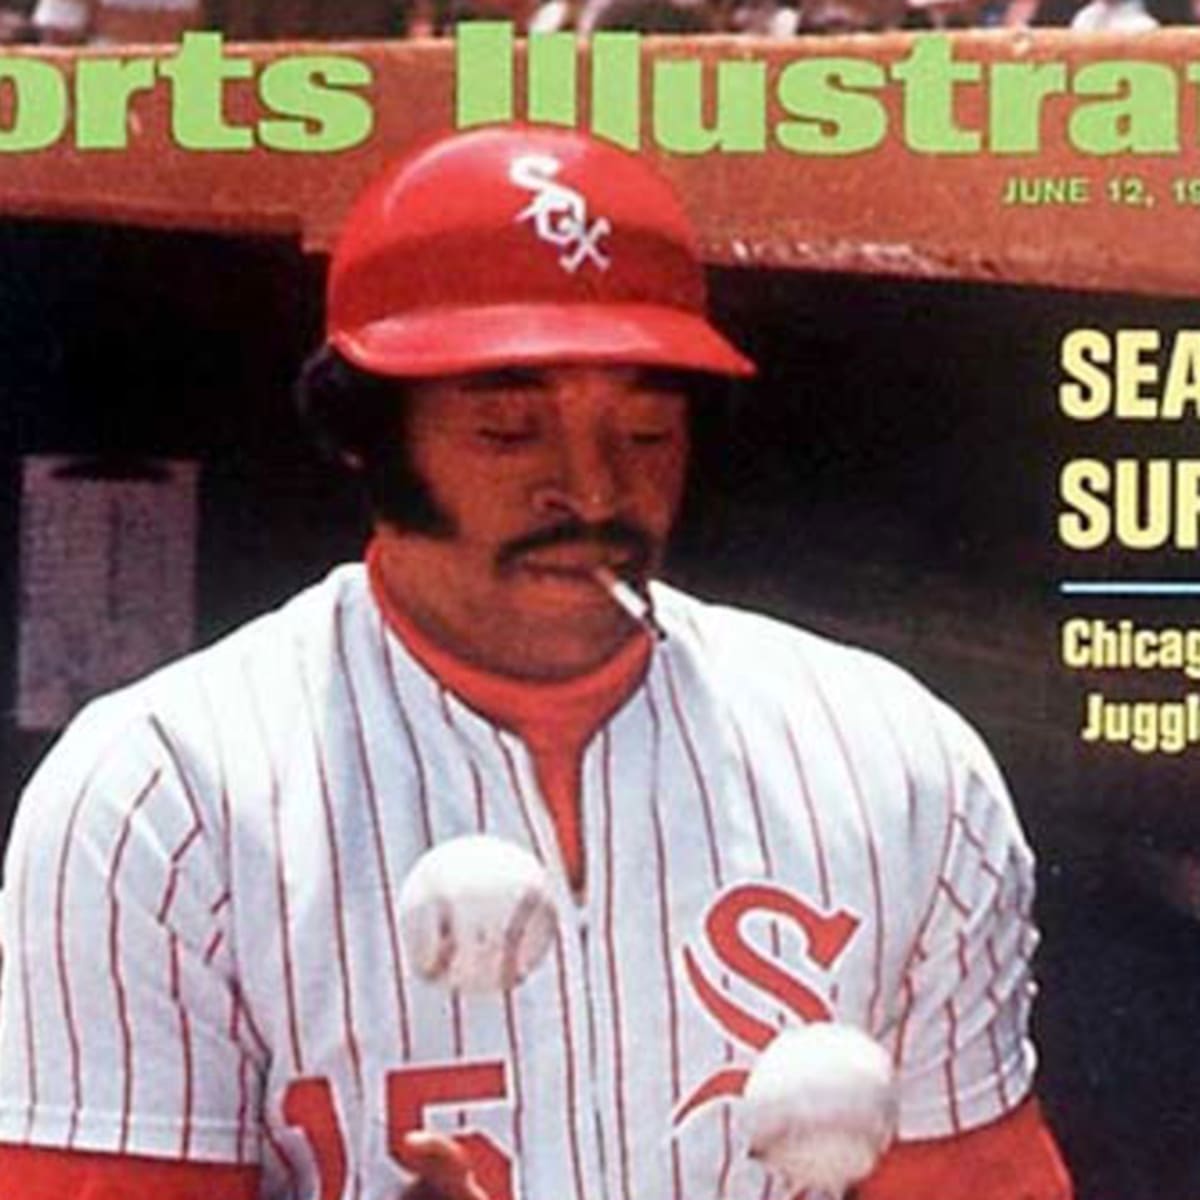 Dick Allen SI cover: The story behind the iconic 1972 photo